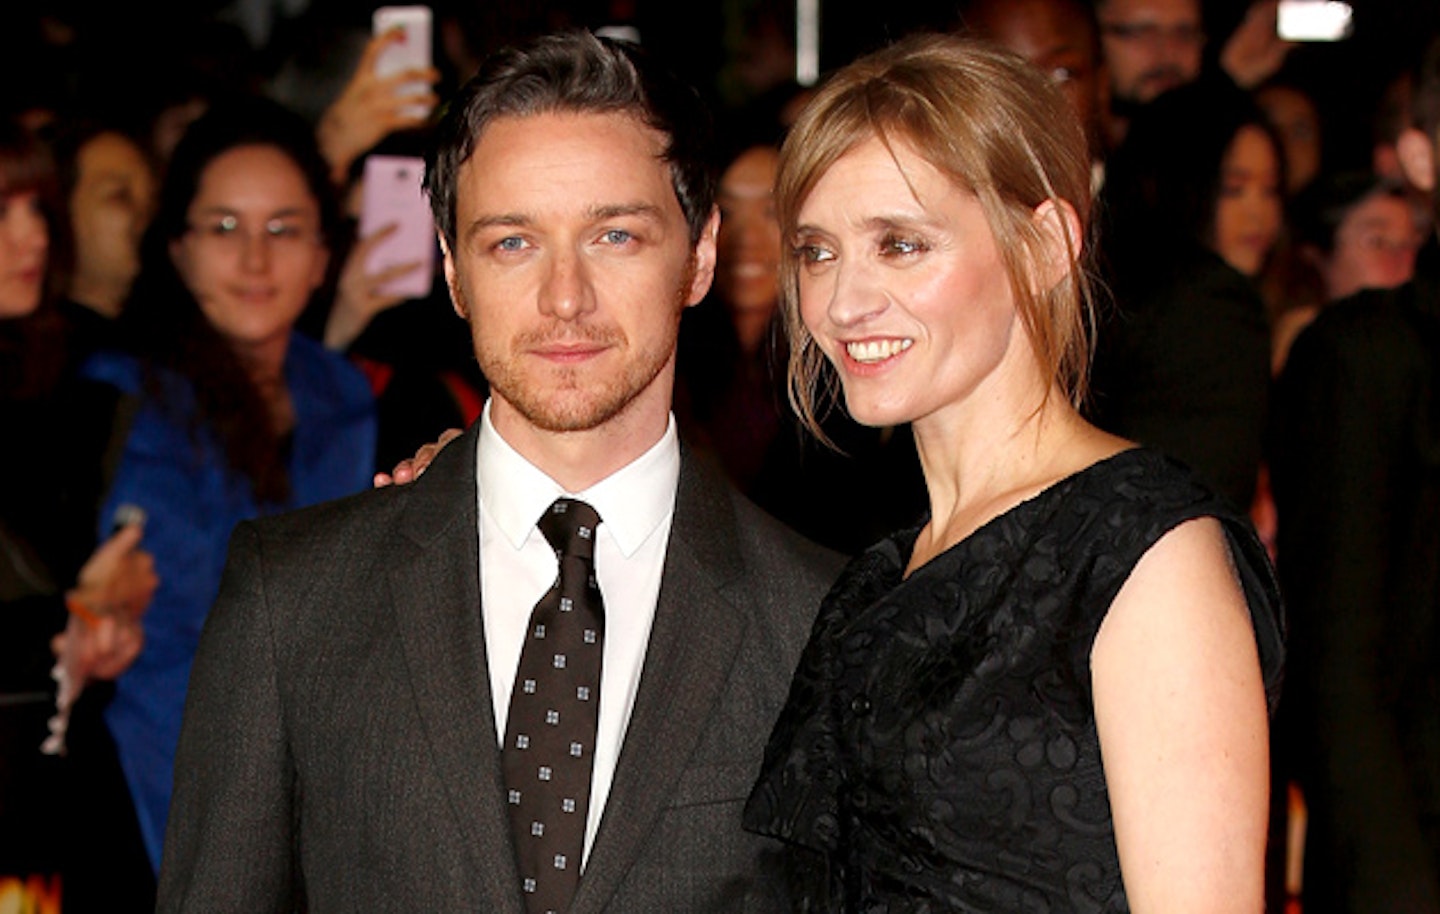 London Film Festival 2014: The Disappearance Of Eleanor Rigby Gala